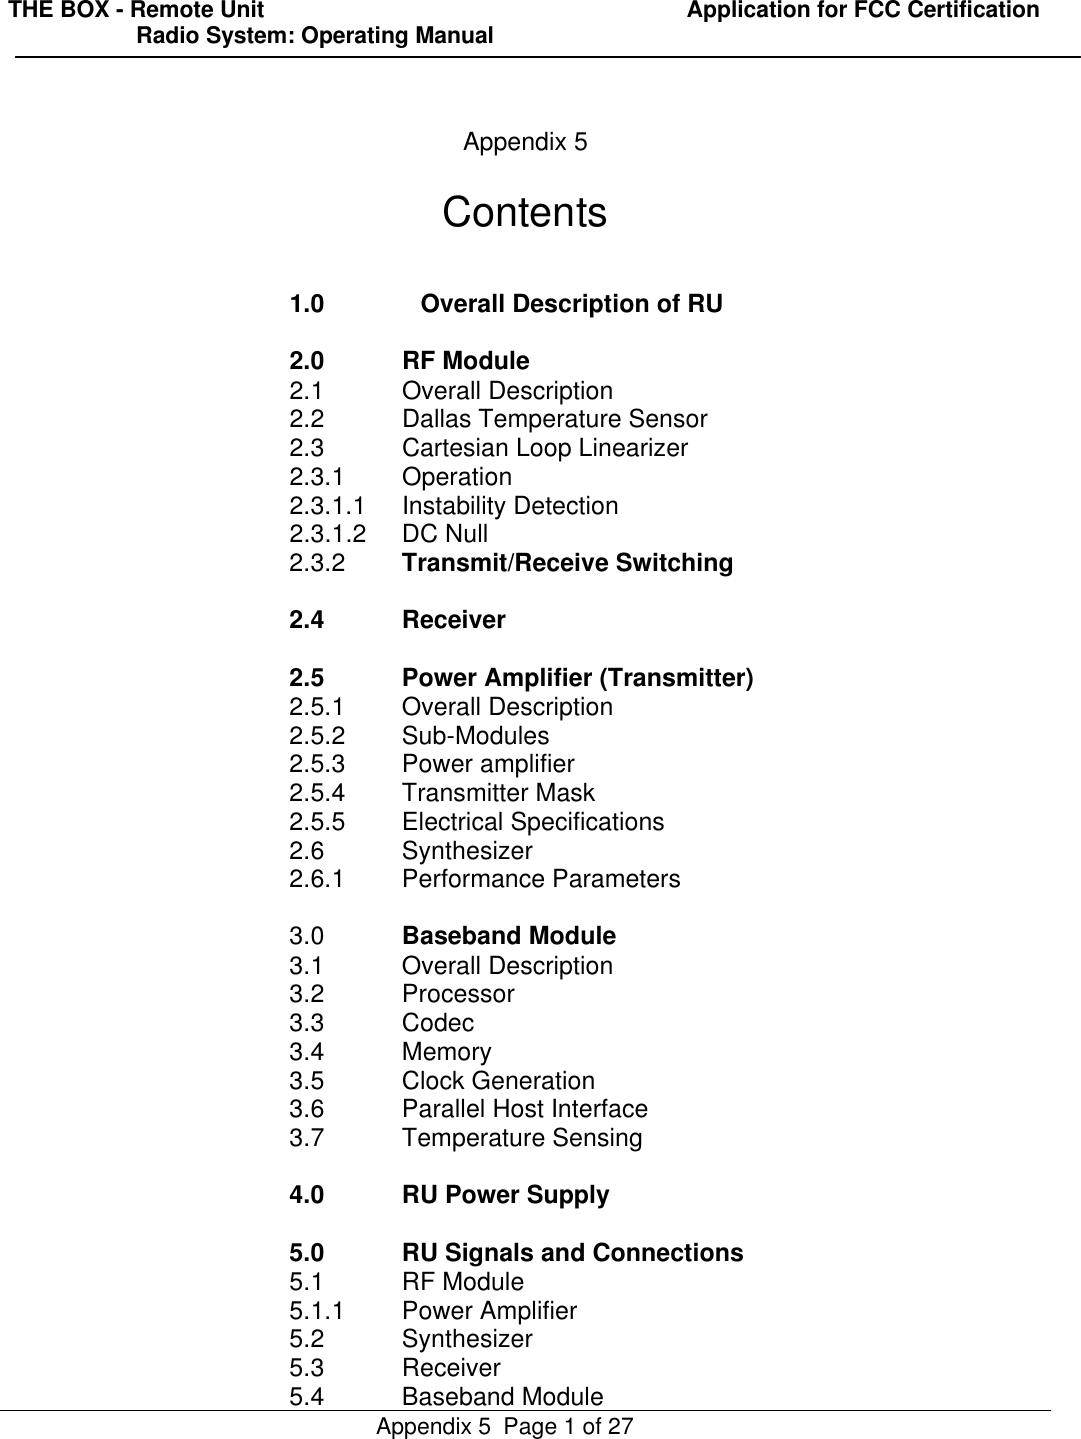 THE BOX - Remote Unit                                                                  Application for FCC Certification                    Radio System: Operating ManualAppendix 5  Page 1 of 27Appendix 5Contents1.0 Overall Description of RU2.0 RF Module2.1 Overall Description2.2 Dallas Temperature Sensor2.3 Cartesian Loop Linearizer2.3.1 Operation2.3.1.1 Instability Detection2.3.1.2 DC Null2.3.2 Transmit/Receive Switching2.4 Receiver2.5 Power Amplifier (Transmitter)2.5.1 Overall Description2.5.2 Sub-Modules2.5.3 Power amplifier2.5.4 Transmitter Mask2.5.5 Electrical Specifications2.6 Synthesizer2.6.1 Performance Parameters3.0 Baseband Module3.1 Overall Description3.2 Processor3.3 Codec3.4 Memory3.5 Clock Generation3.6 Parallel Host Interface3.7 Temperature Sensing4.0 RU Power Supply5.0 RU Signals and Connections5.1 RF Module5.1.1 Power Amplifier5.2 Synthesizer5.3 Receiver5.4 Baseband Module